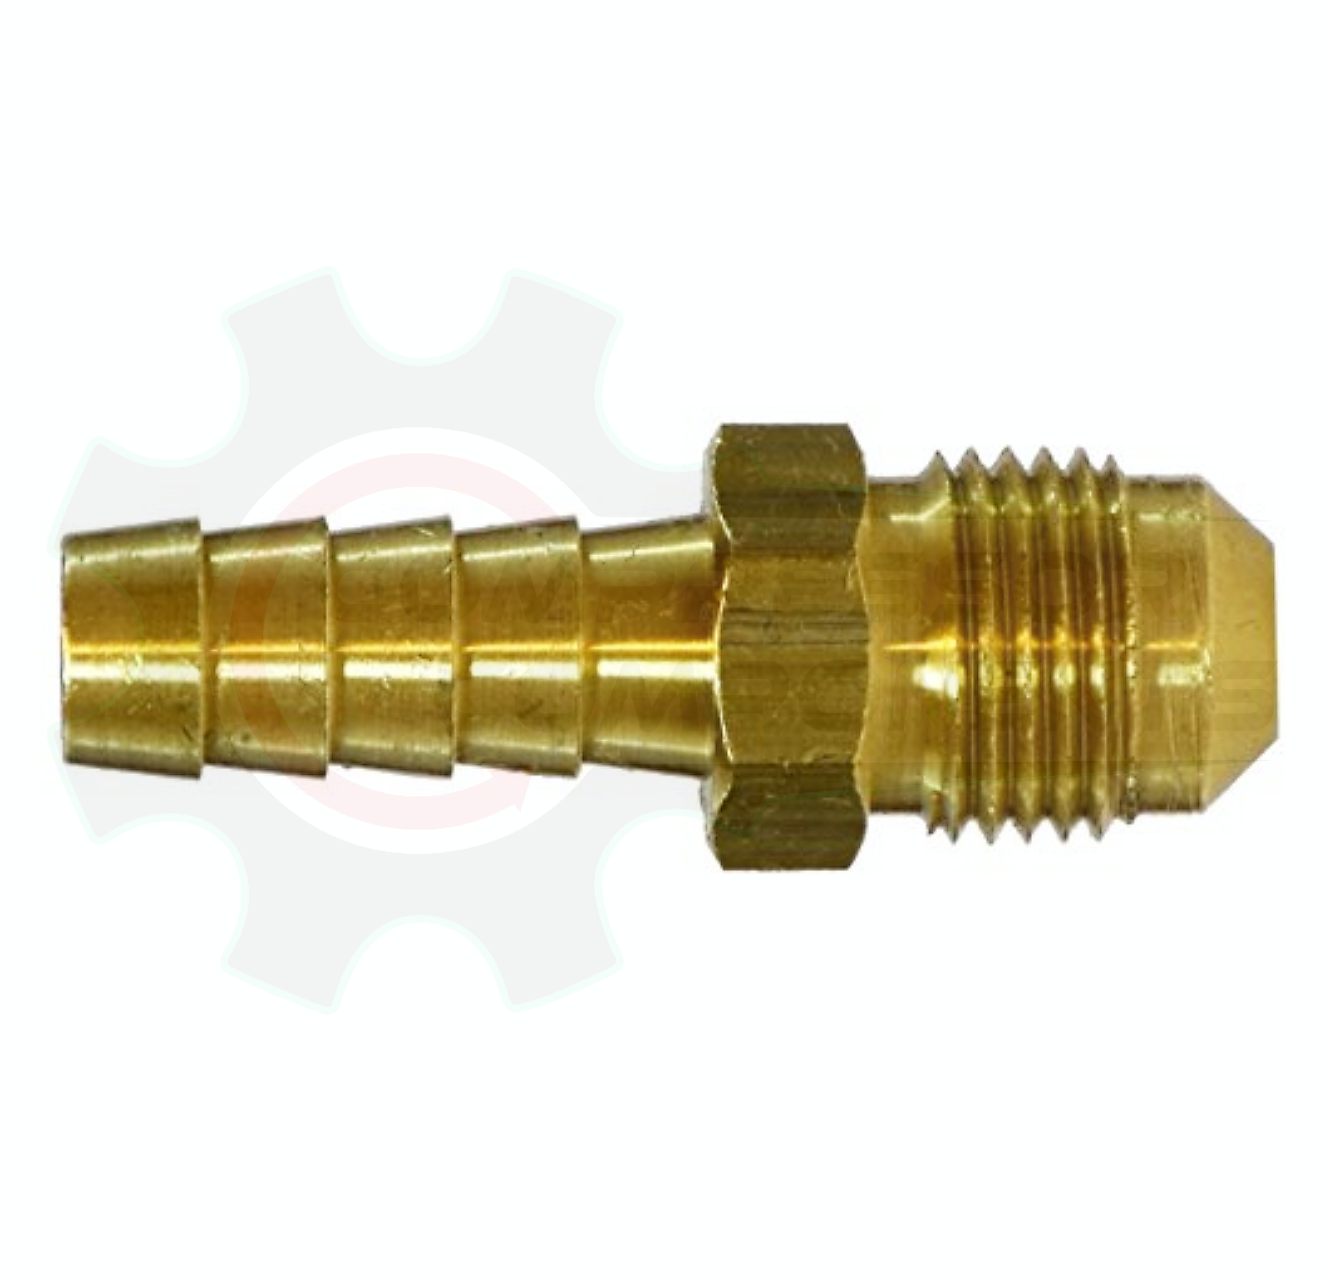 1/4" X 1/4" Hose Barb X 45 Degree Flare Adapter